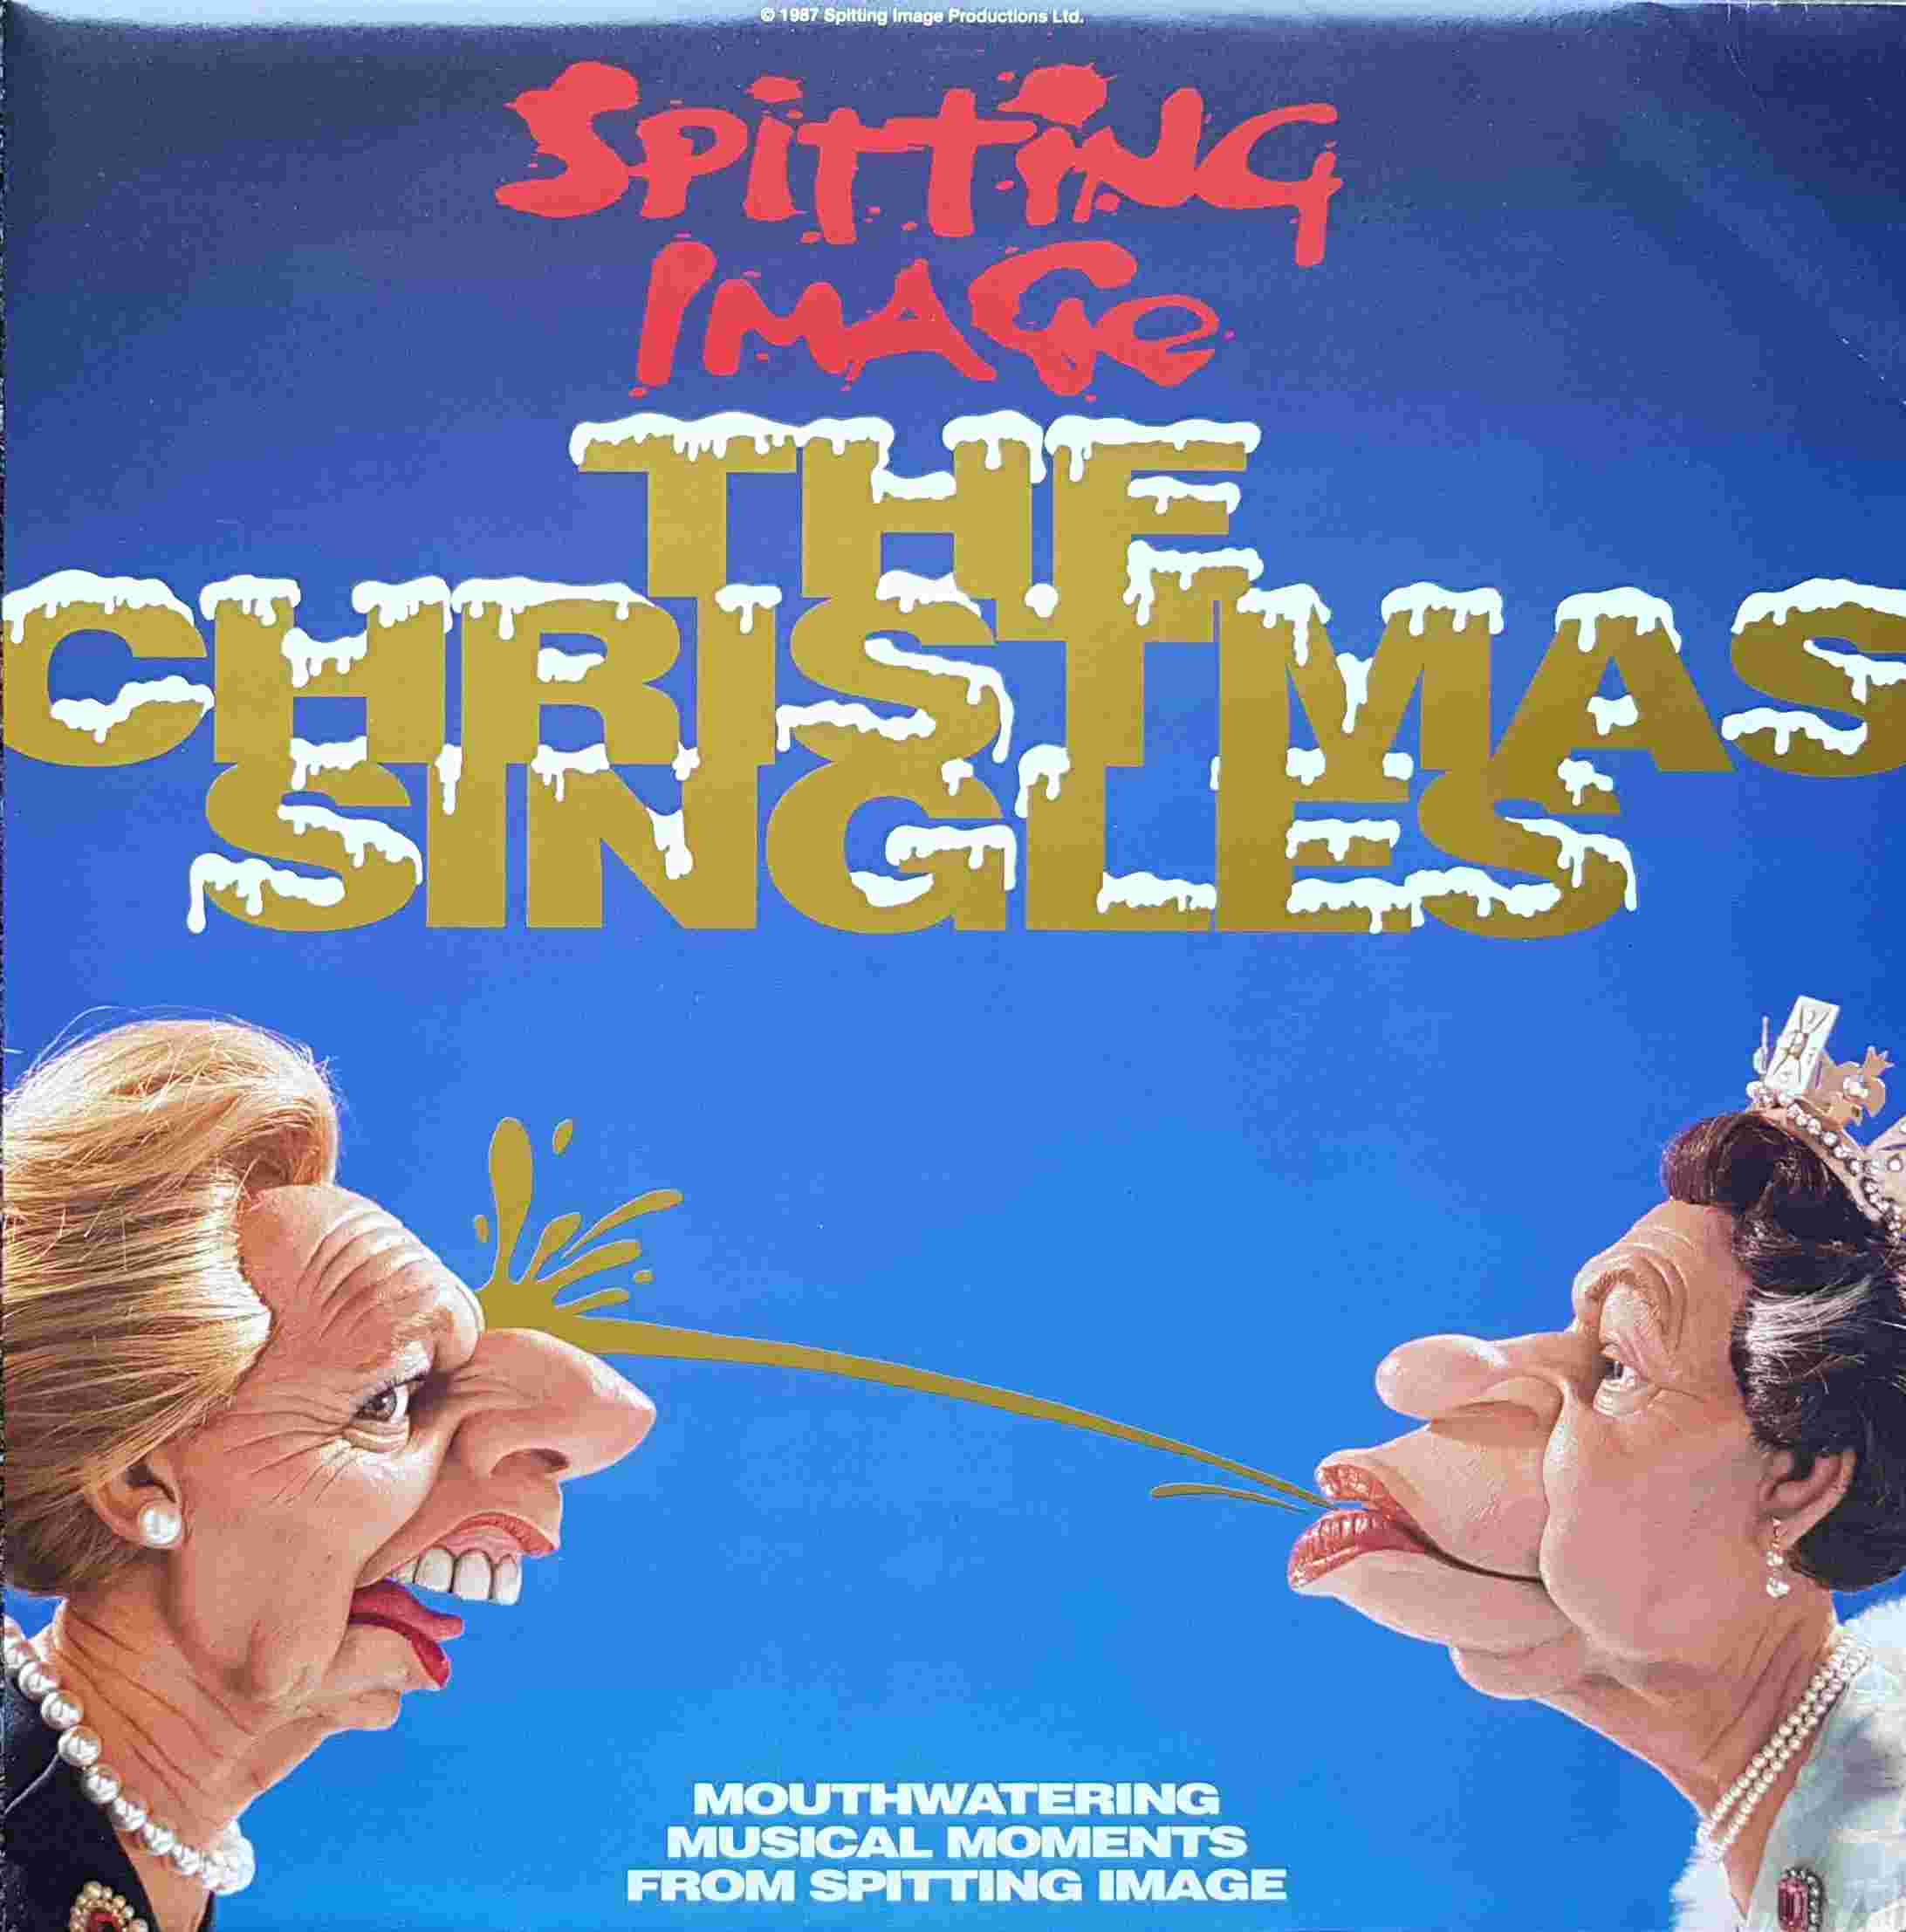 Picture of 12 EM 166 The Christmas singles (Spitting image) by artist Brown / Pope / Simpson / Dare from ITV, Channel 4 and Channel 5 12inches library